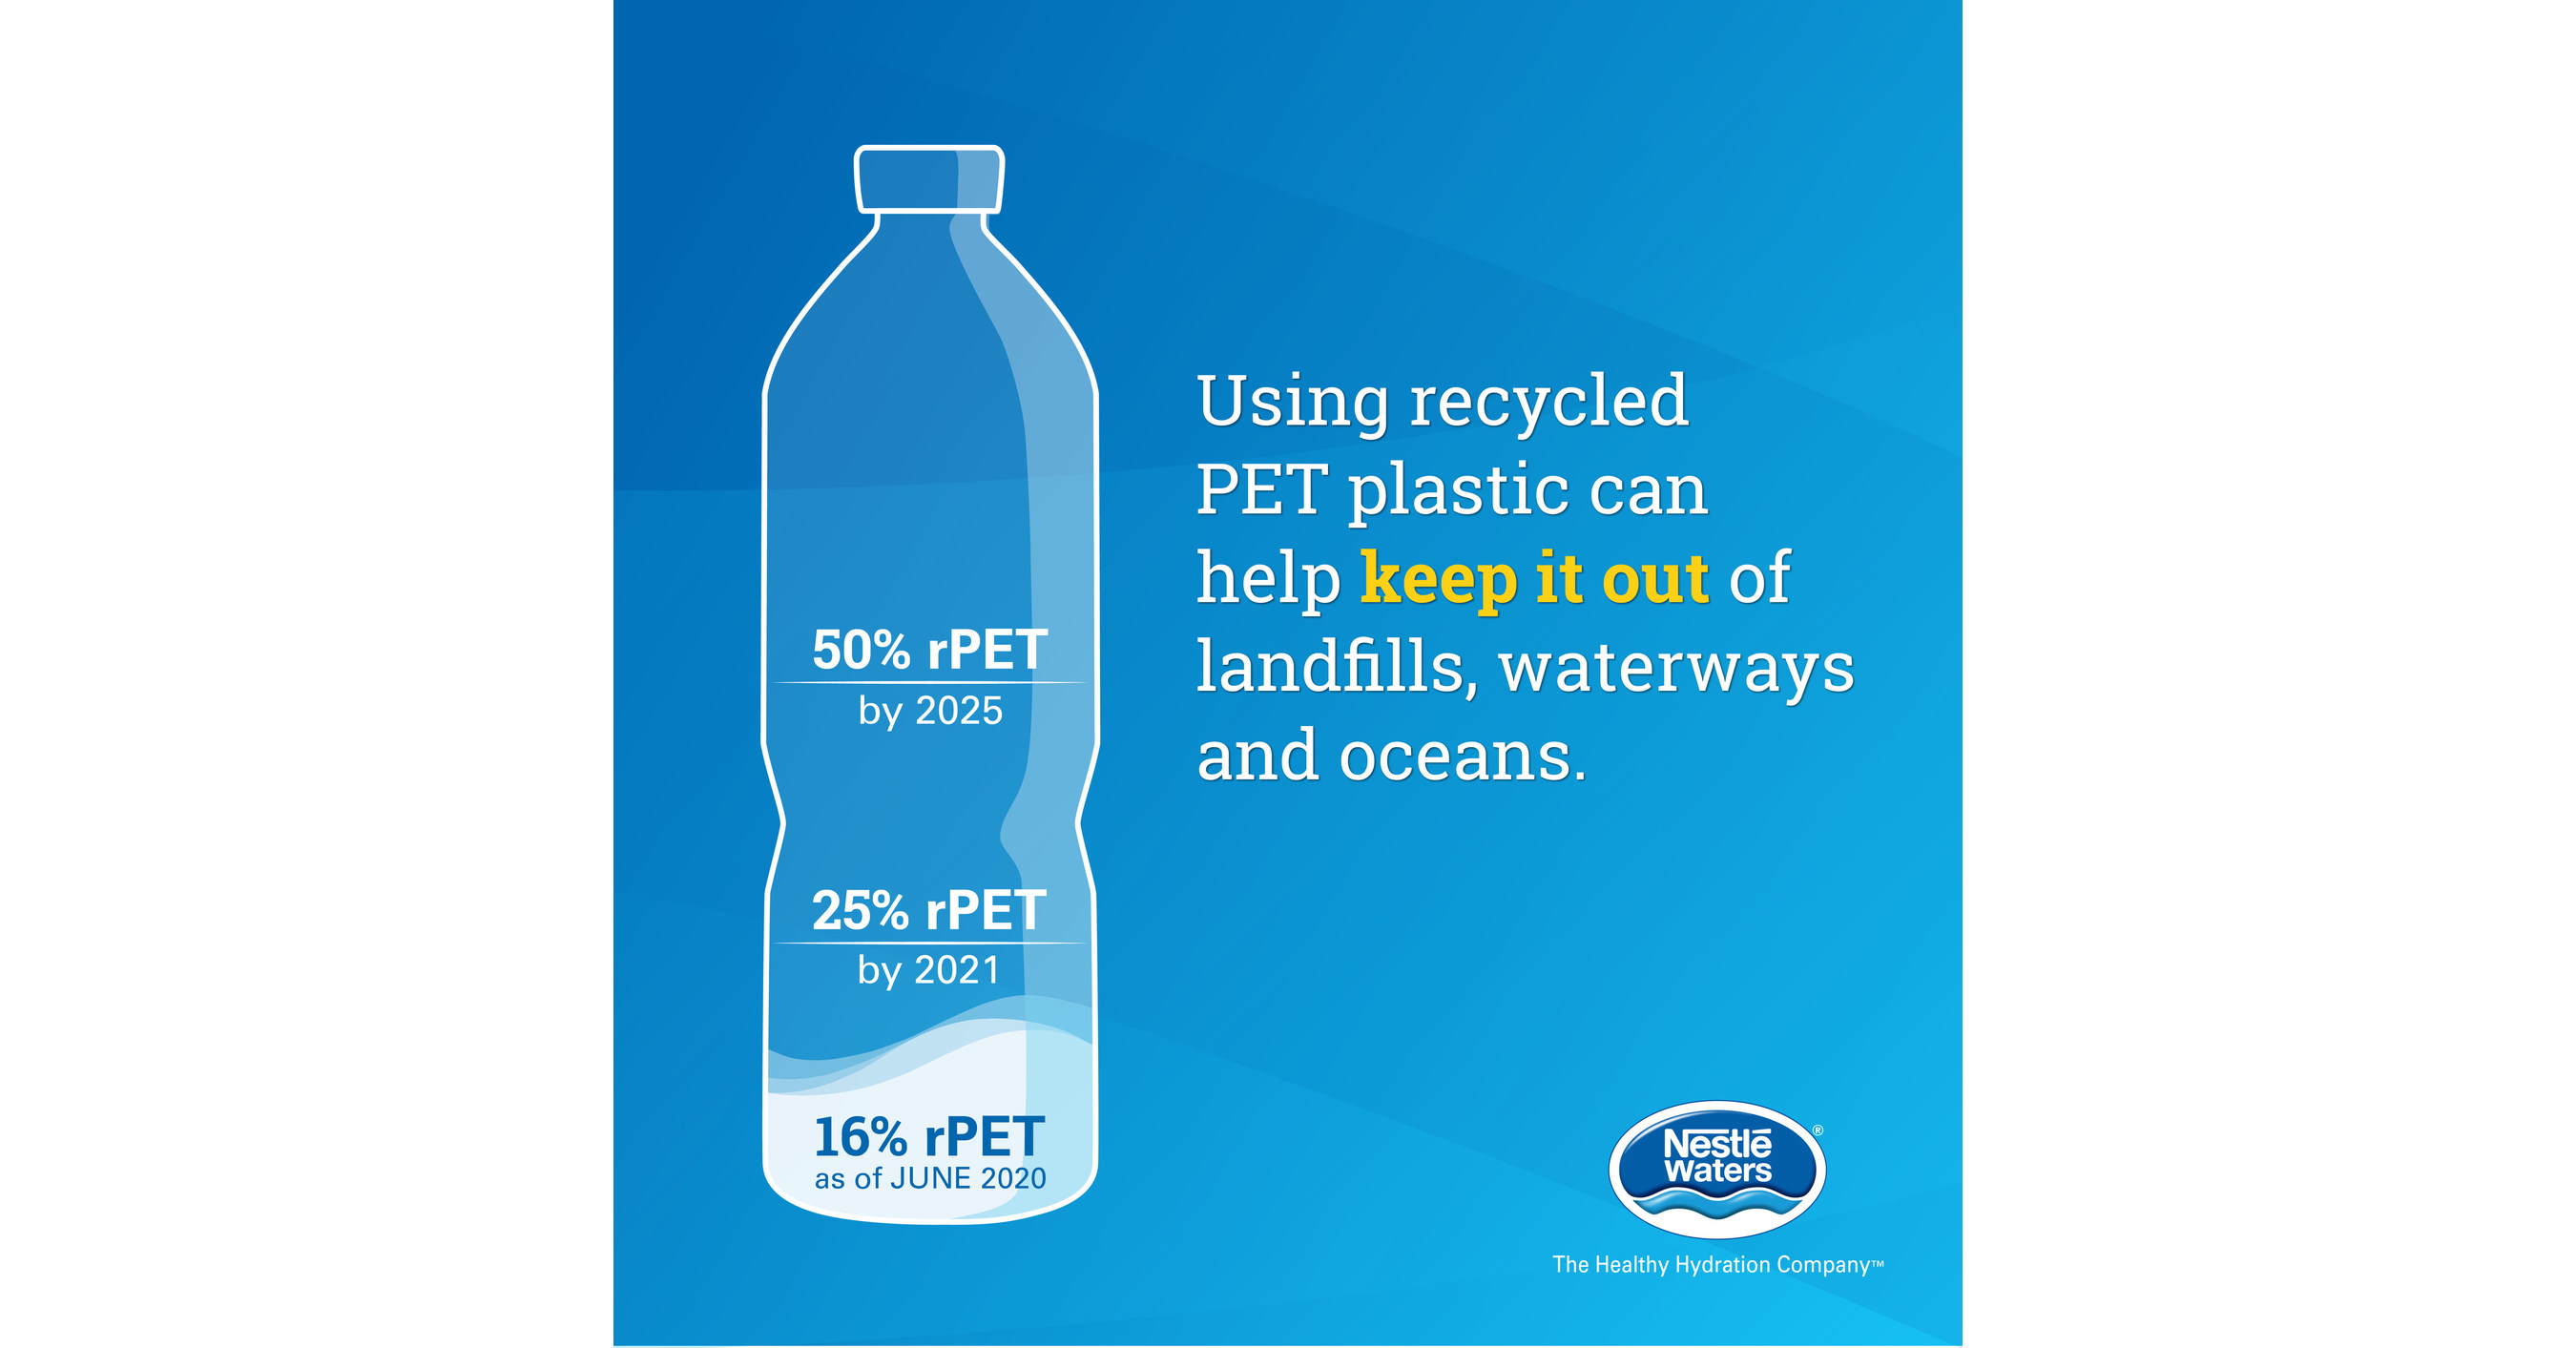 Nestlé Waters North across Additional Use U.S. Use Expands 100% Plastic America Doubles of Brands, Portfolio Three in (rPET) Domestic Recycled rPET